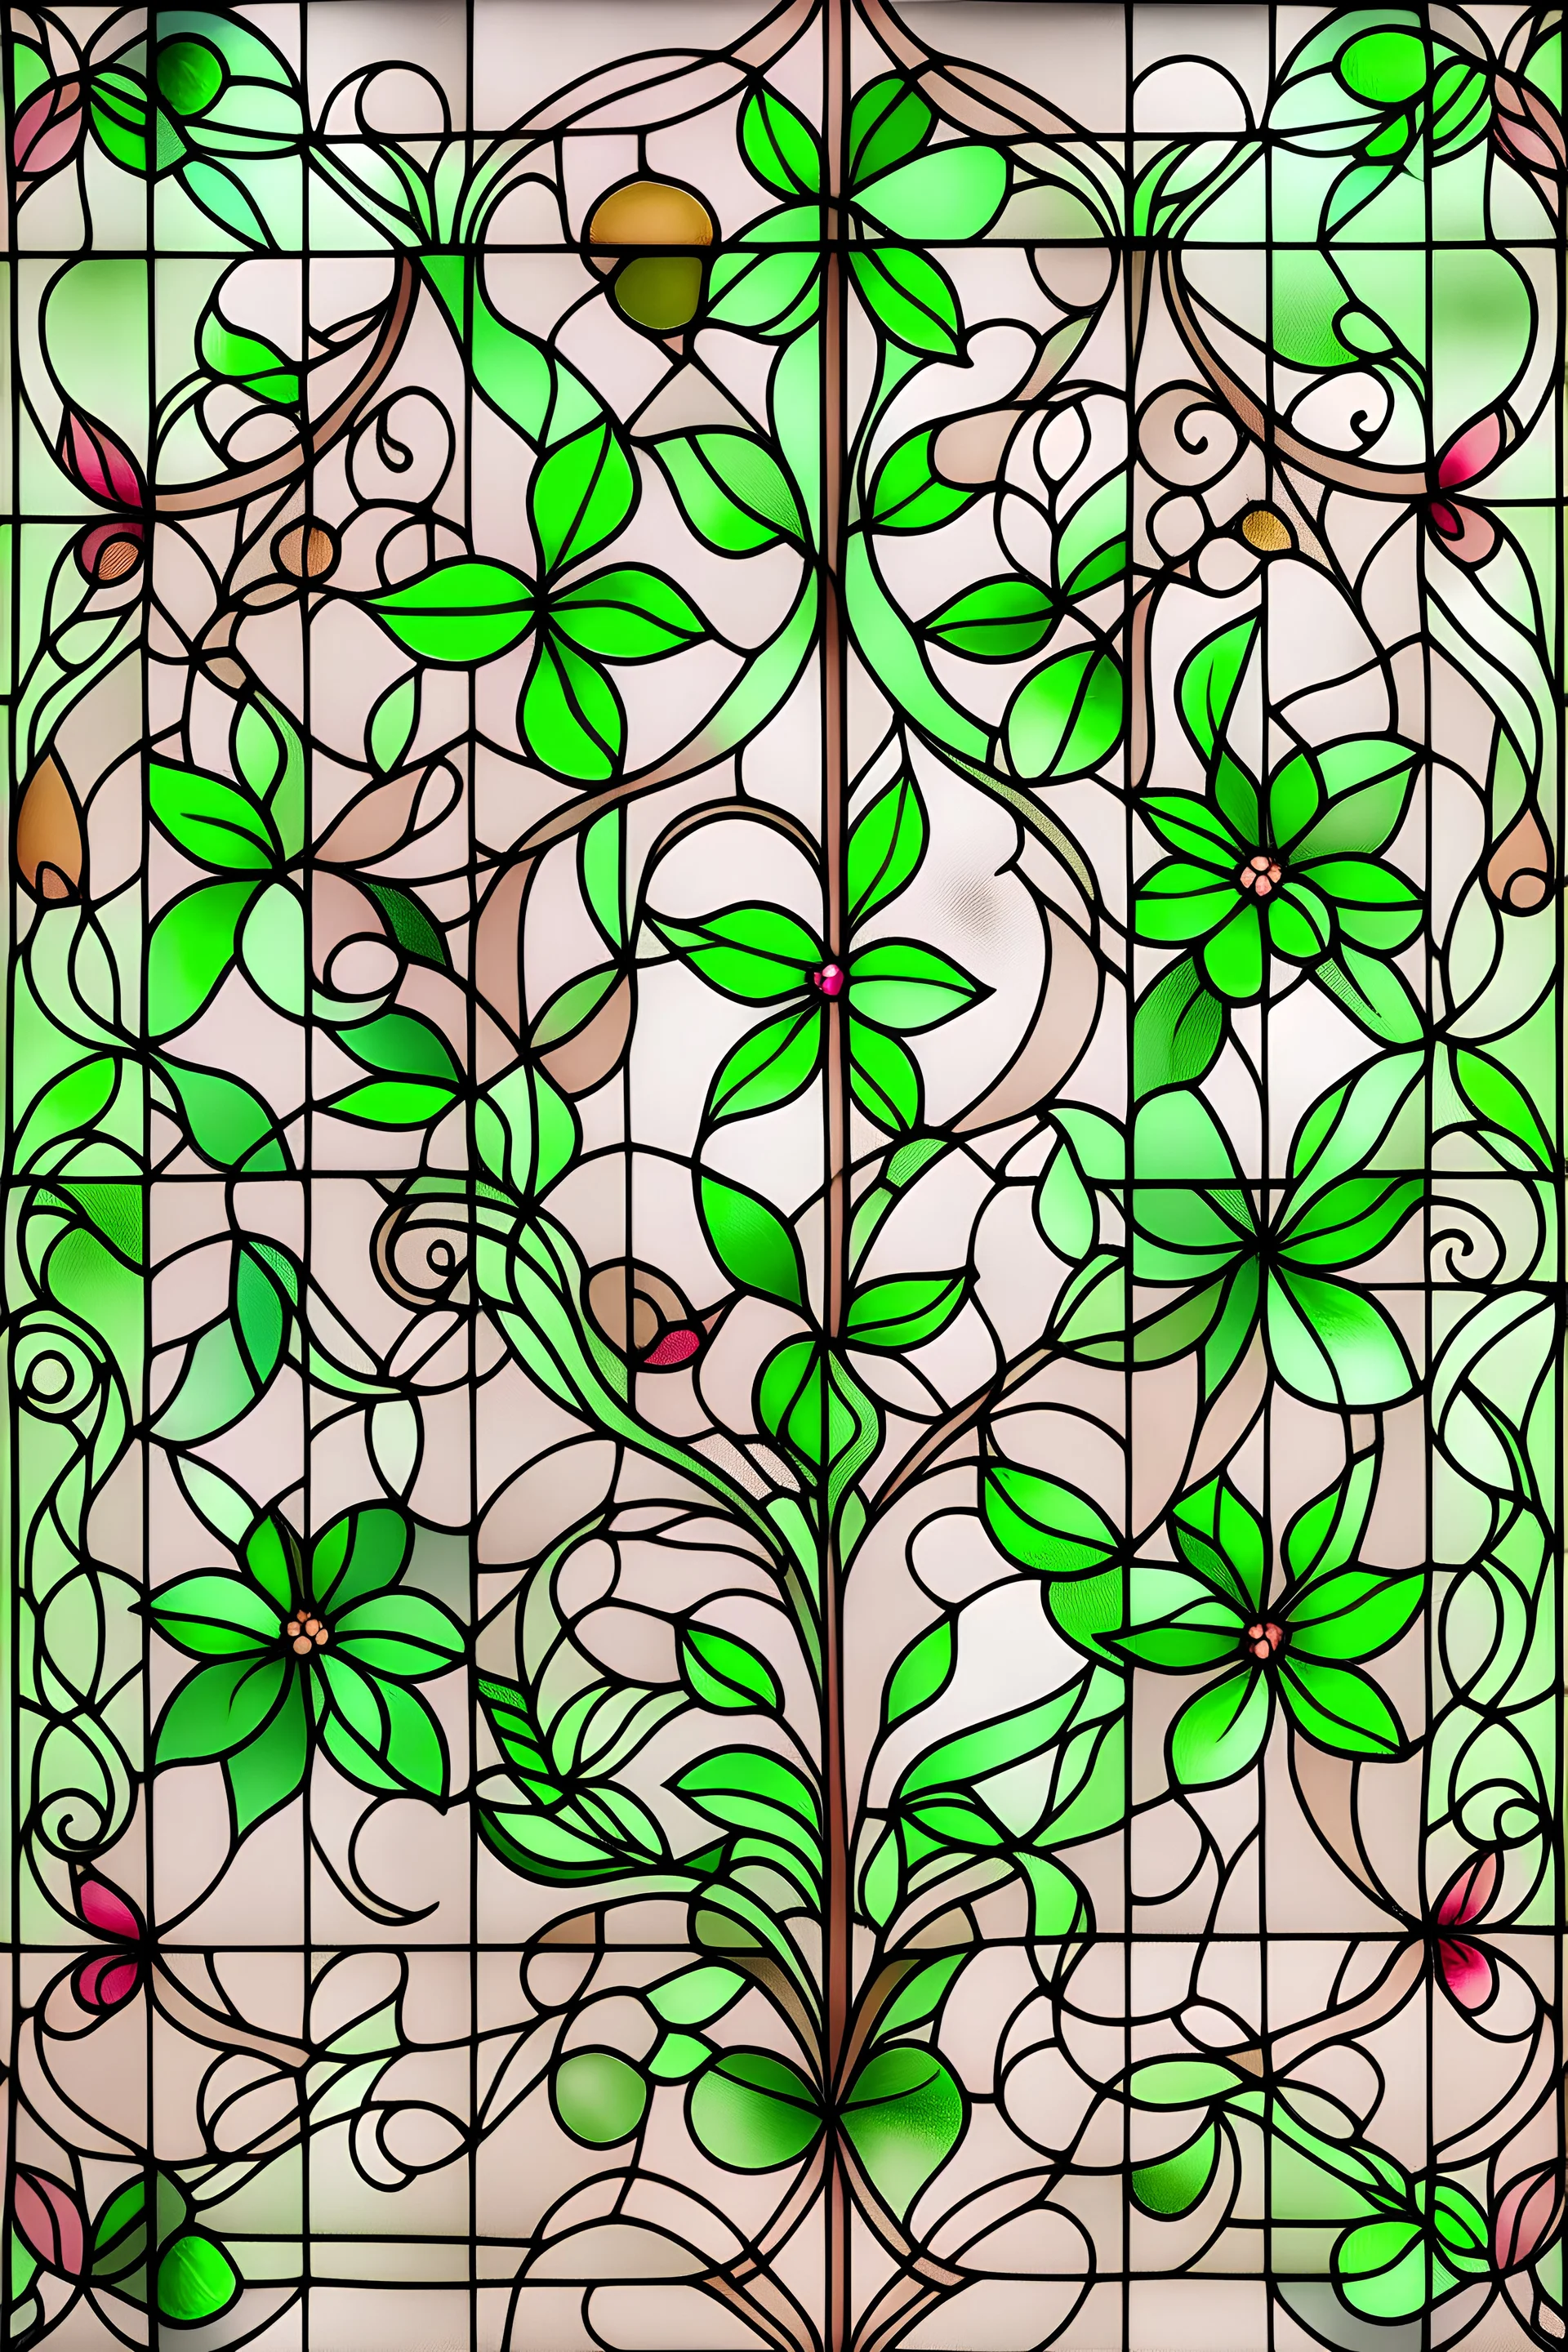 Simple Stain glass of flowers and vines